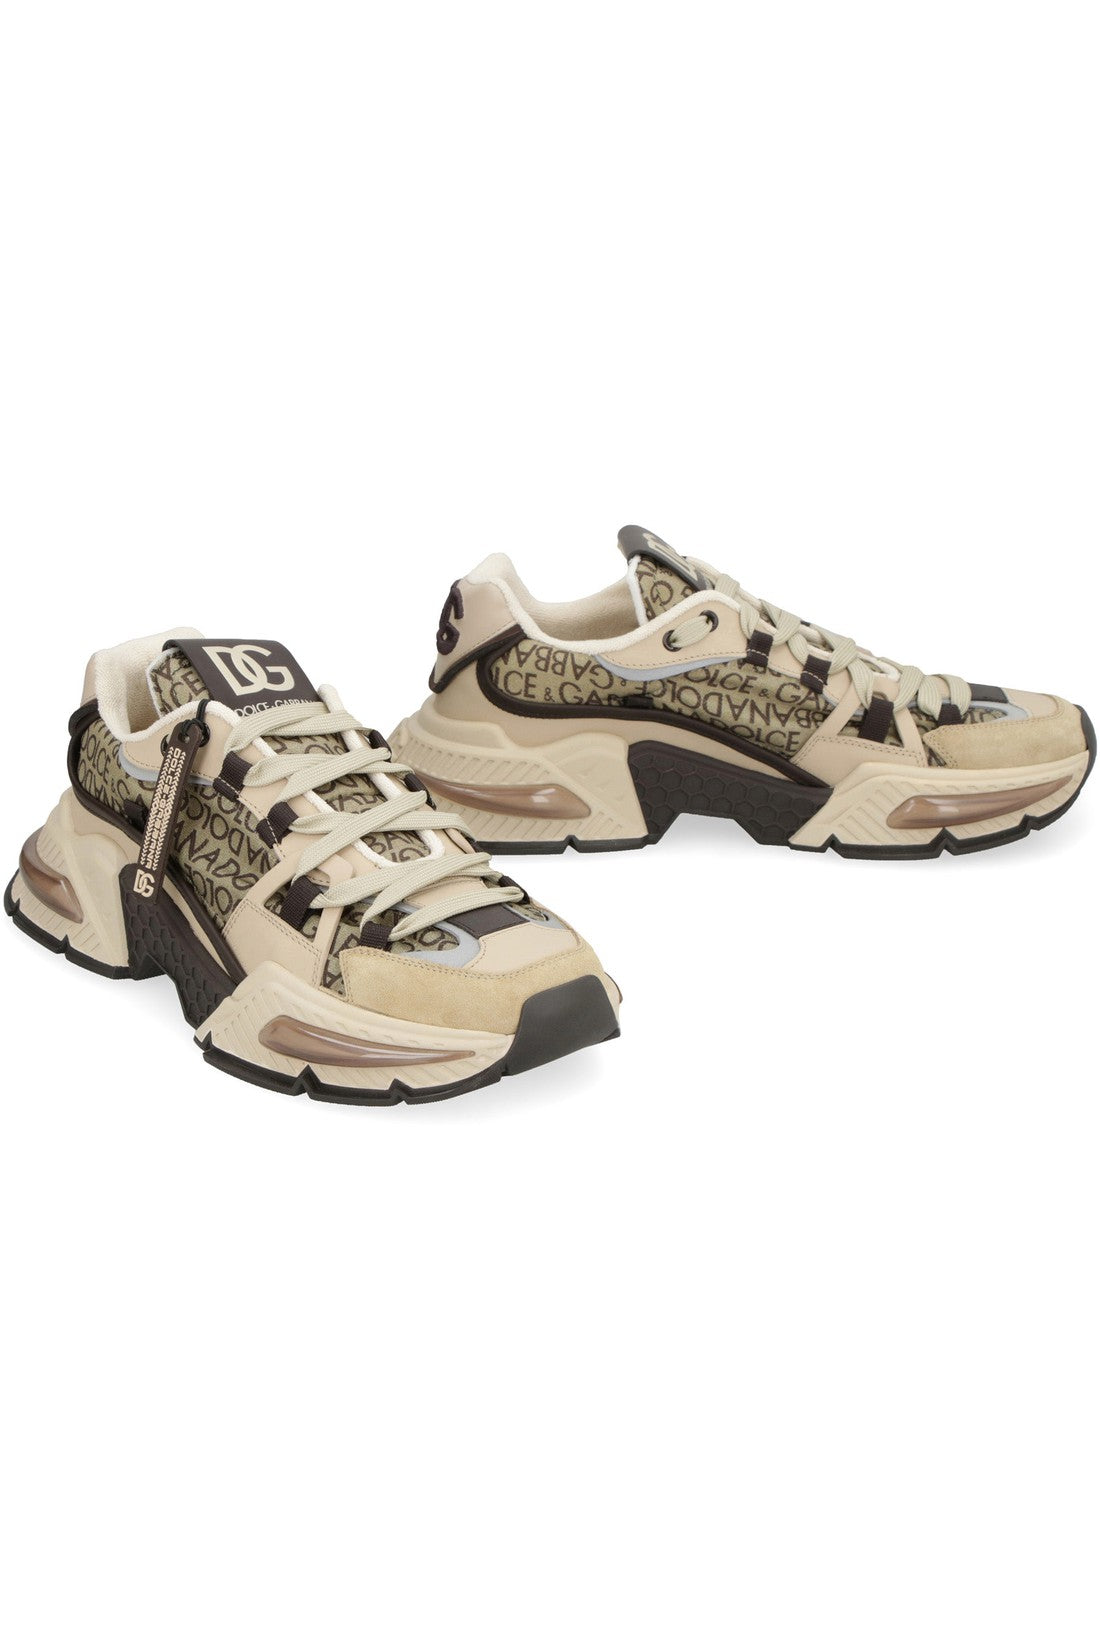 Dolce & Gabbana-OUTLET-SALE-Airmaster nylon low-top sneakers-ARCHIVIST